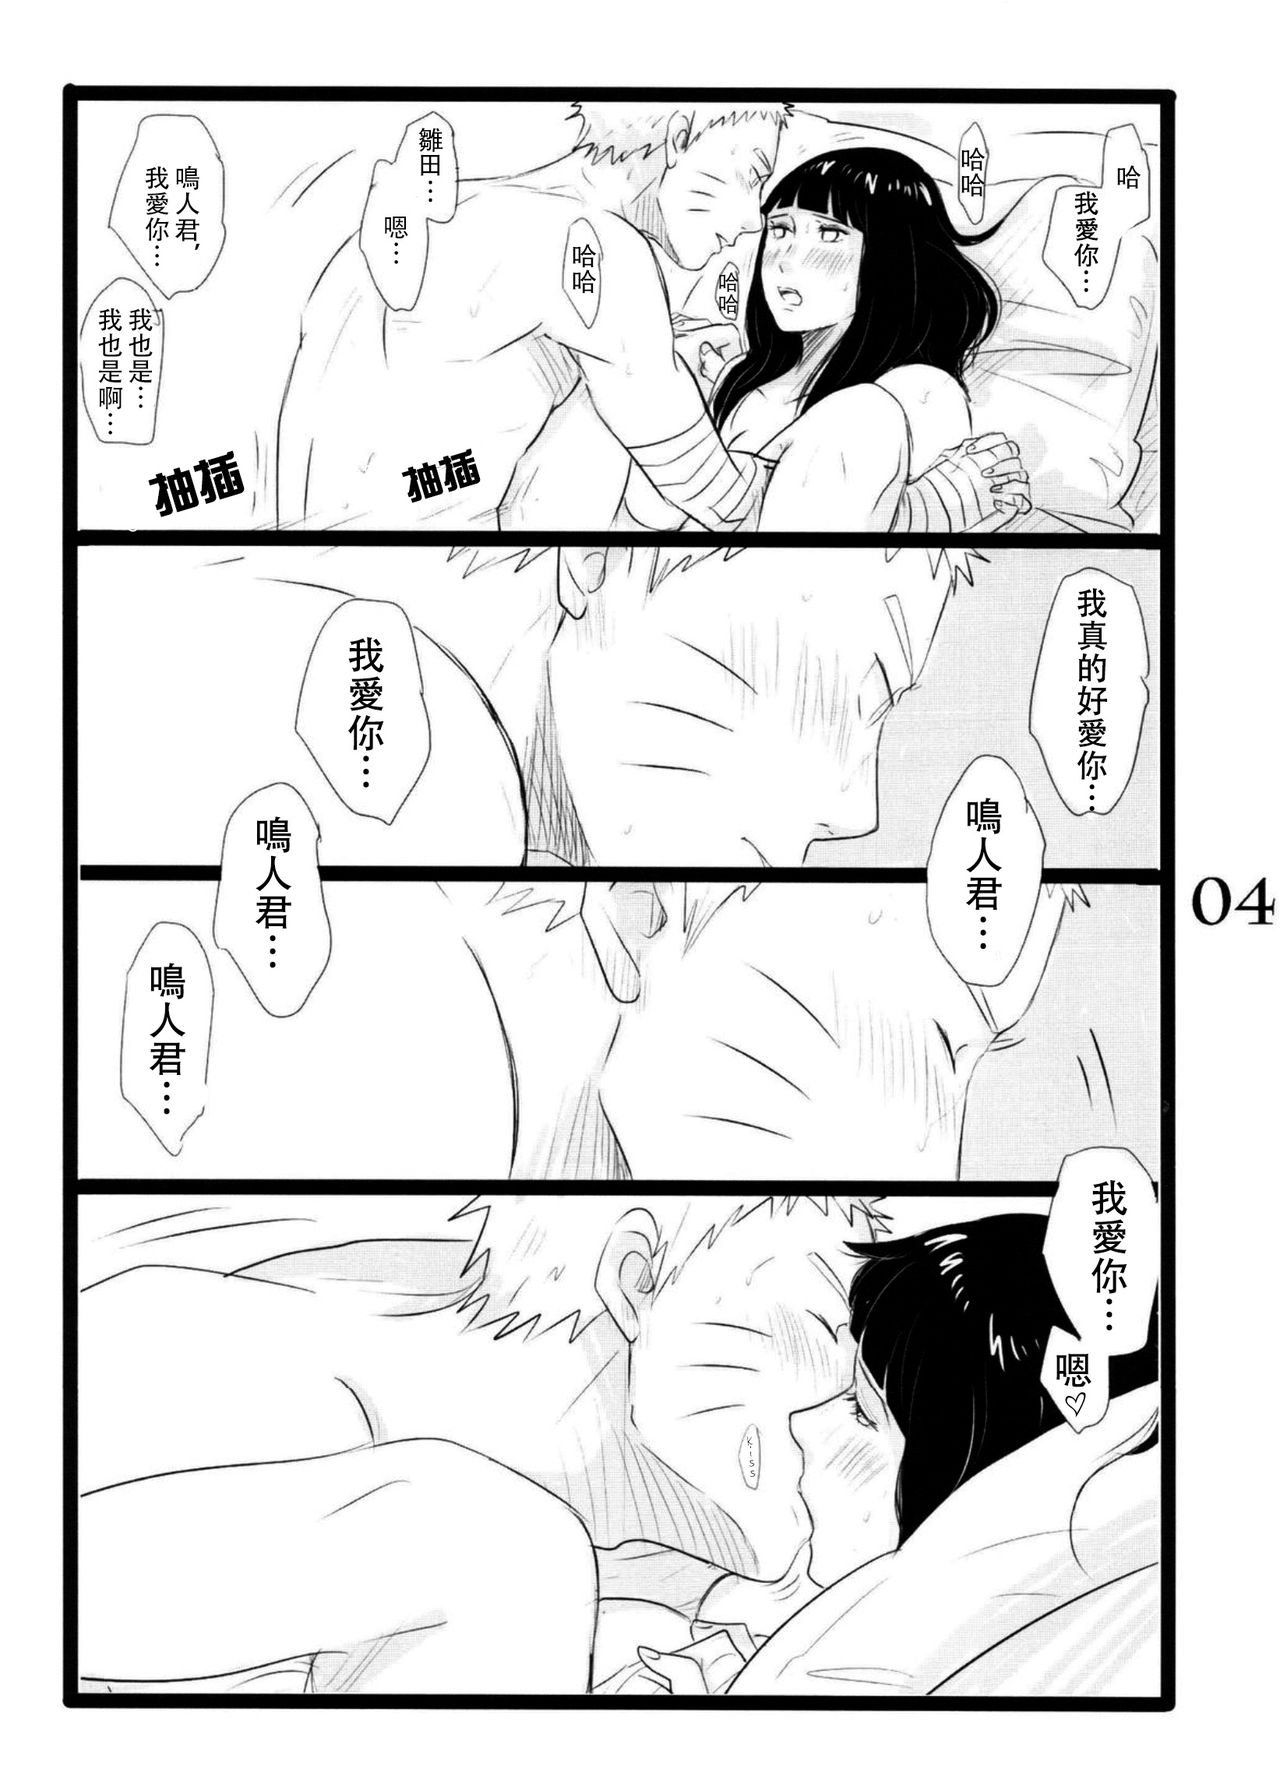 (C88) [blink (shimoyake)] YOUR MY SWEET - I LOVE YOU DARLING (Naruto) [Chinese] [沒有漢化] page 5 full